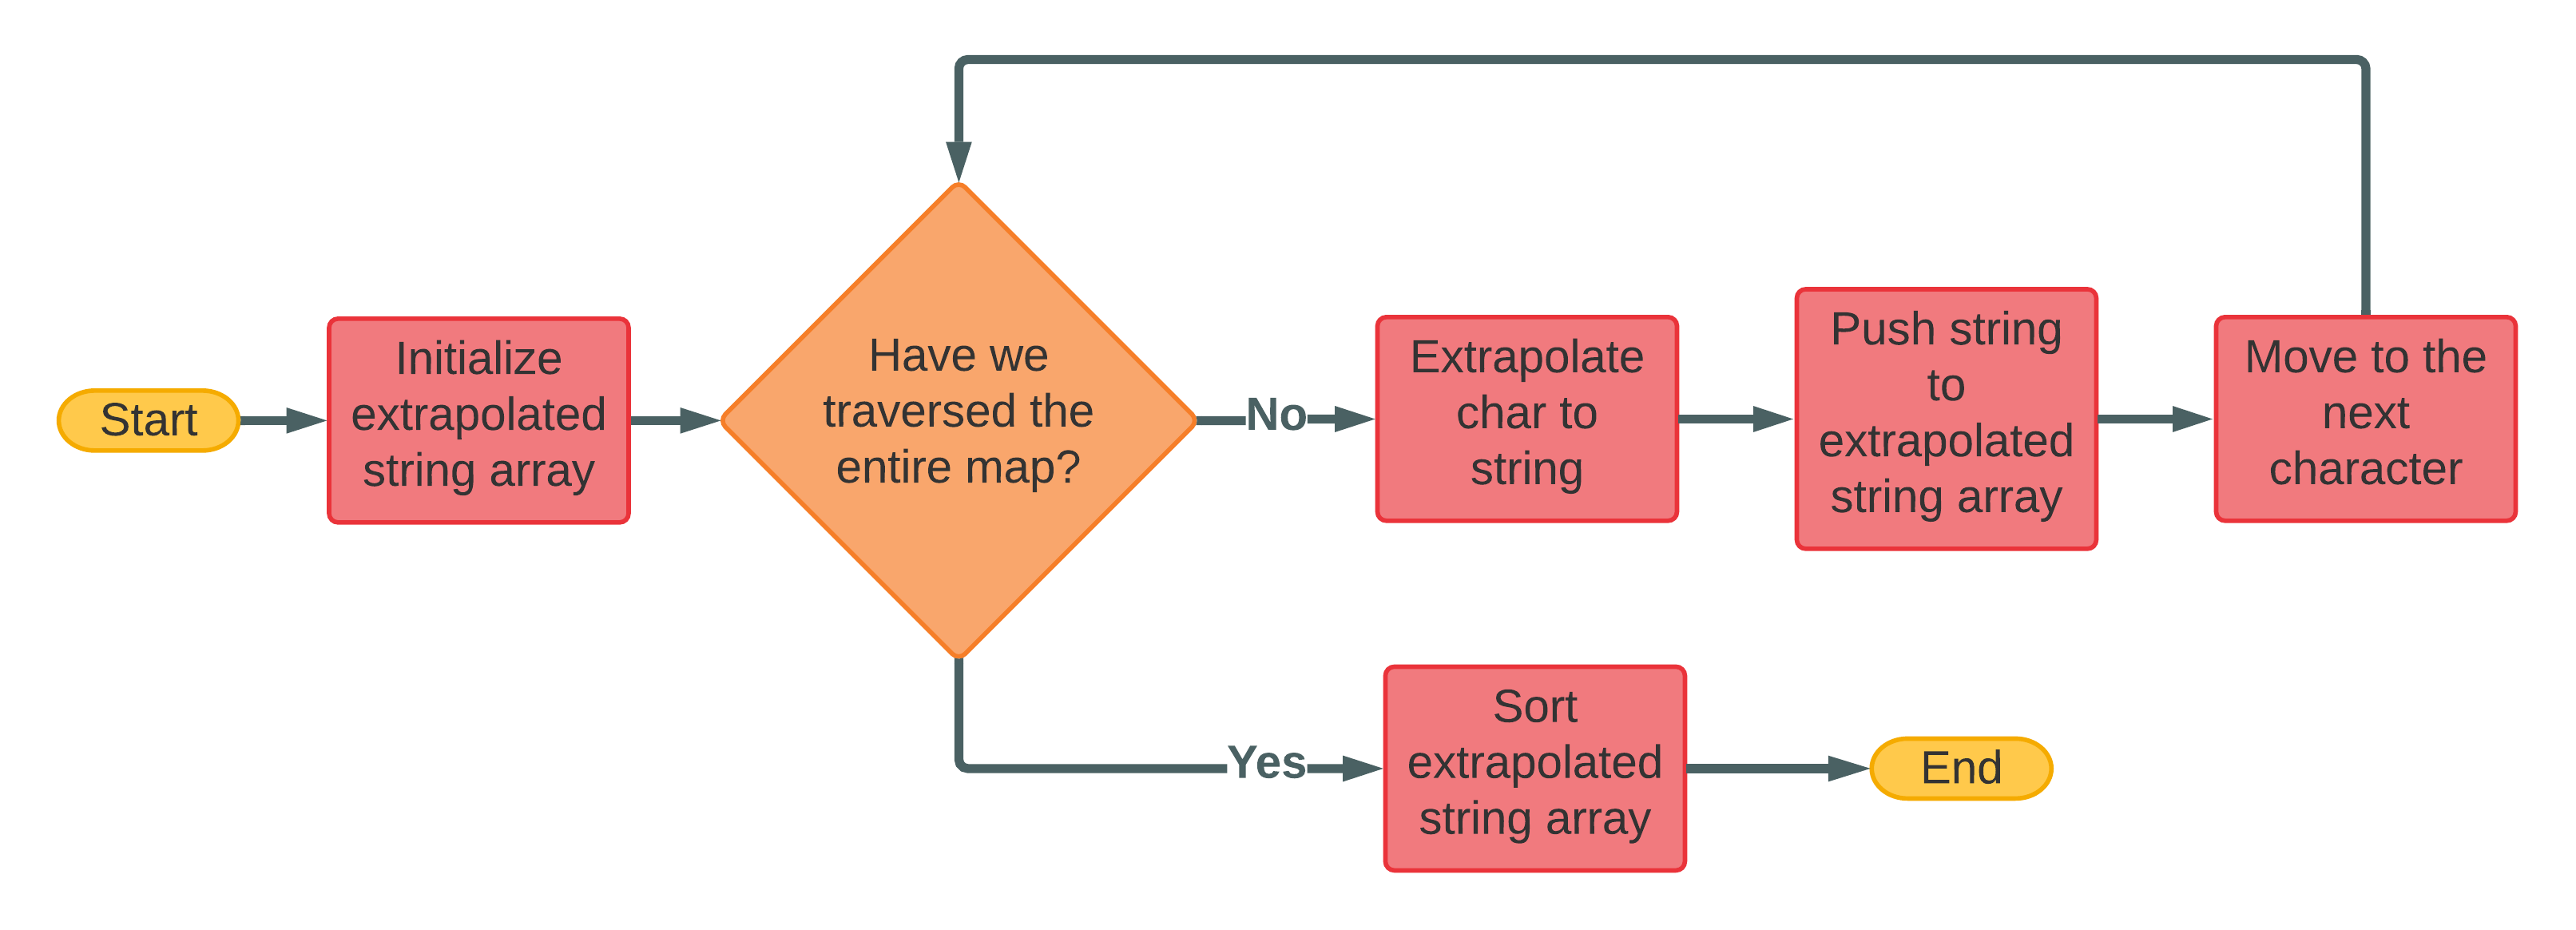 A flowchart illustrating the logic of extrapolating and sorting characters.